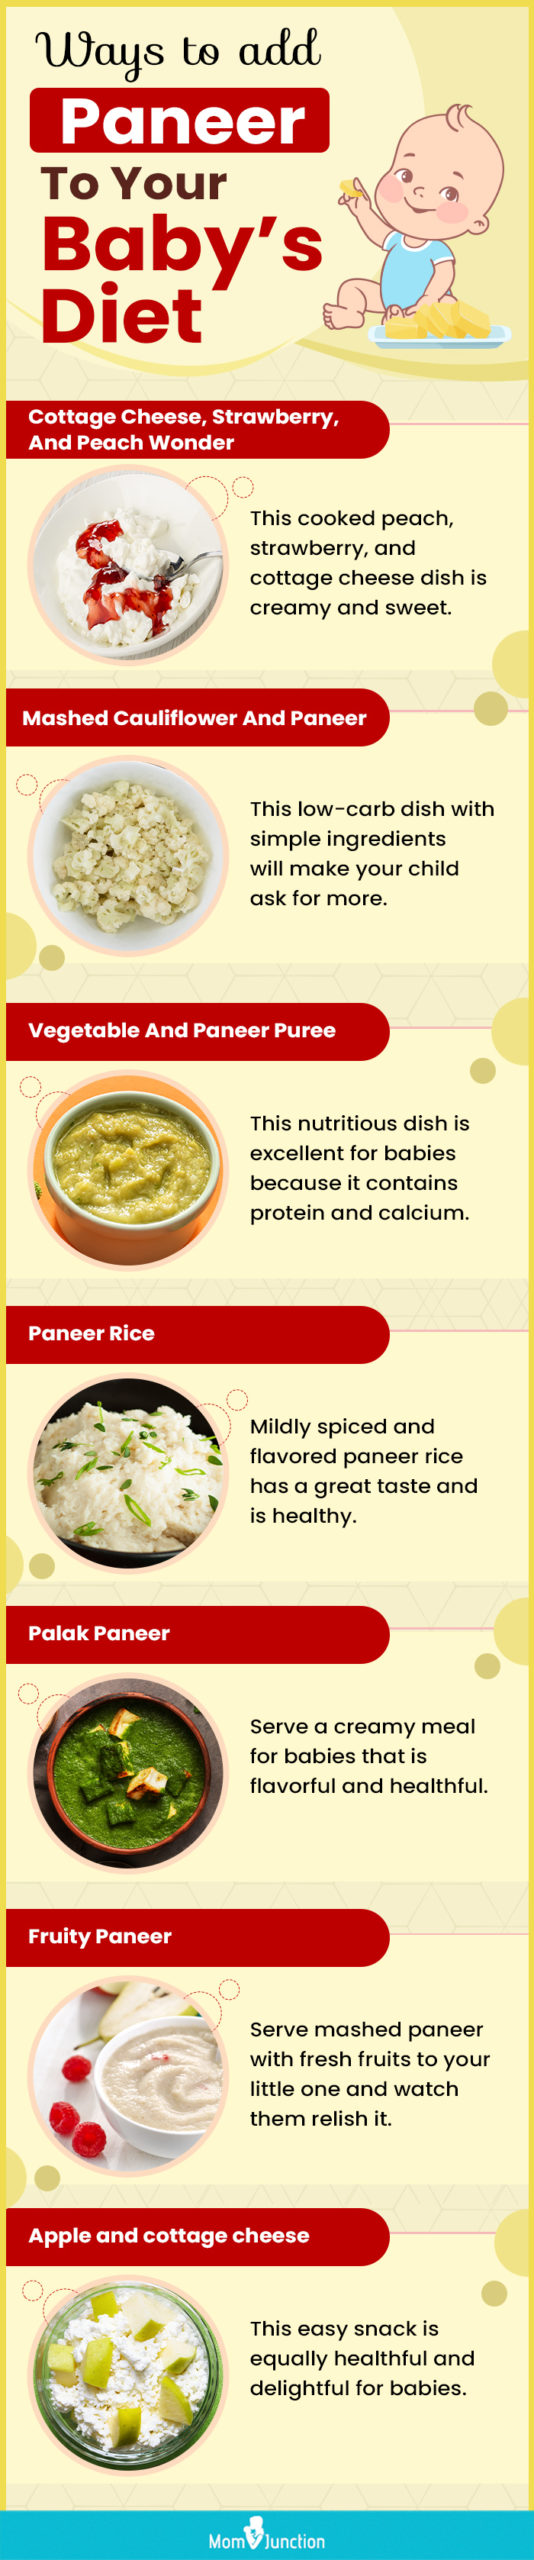 ways to add paneer to your baby’s diet (infographic)